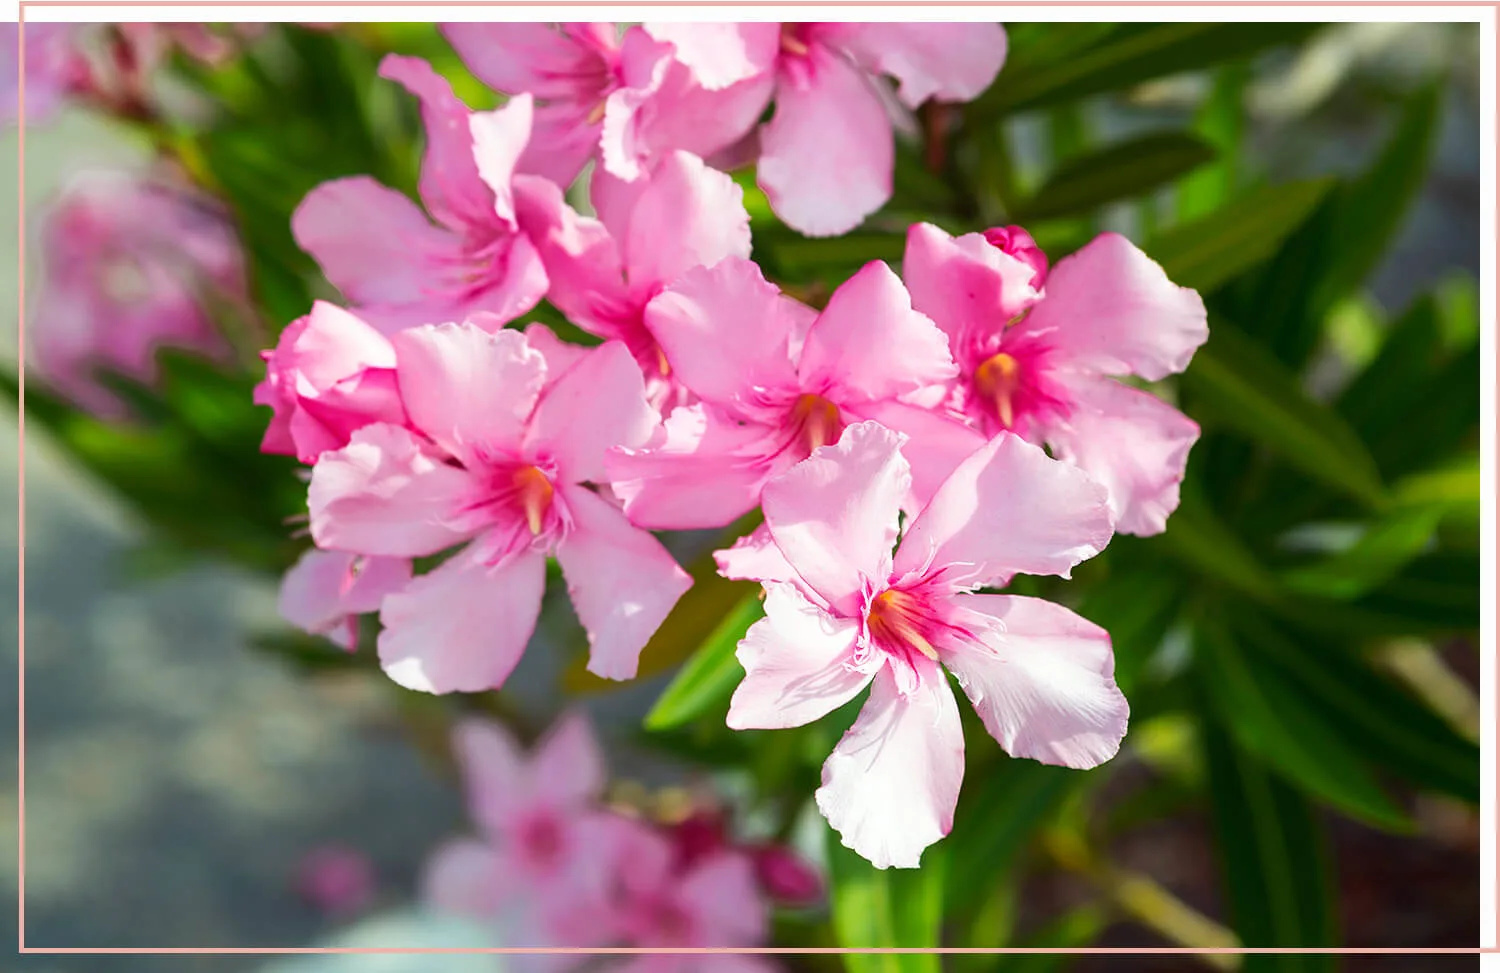 flowering-weeds-and-unexpected-beauty-33-oleander